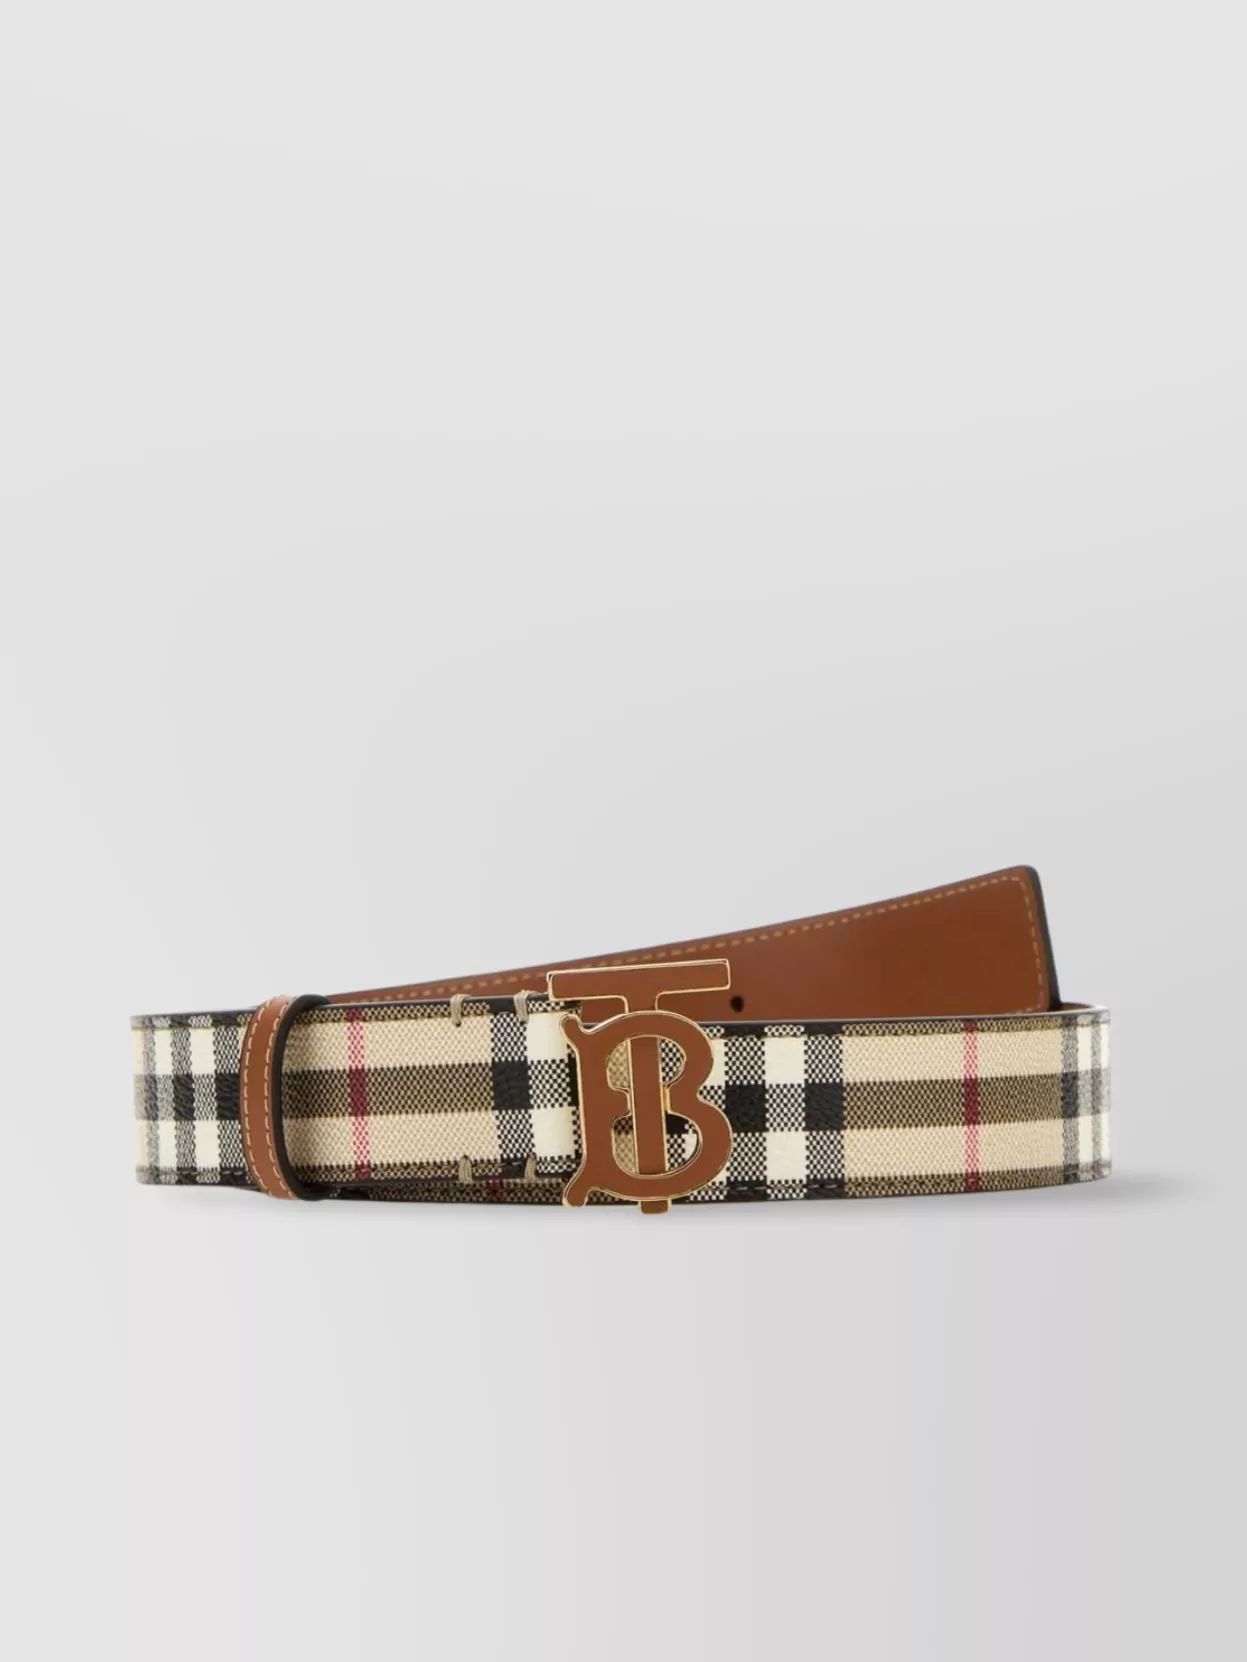 Burberry Canvas Belt With Checkered Design And Contrasting Trim In Brown